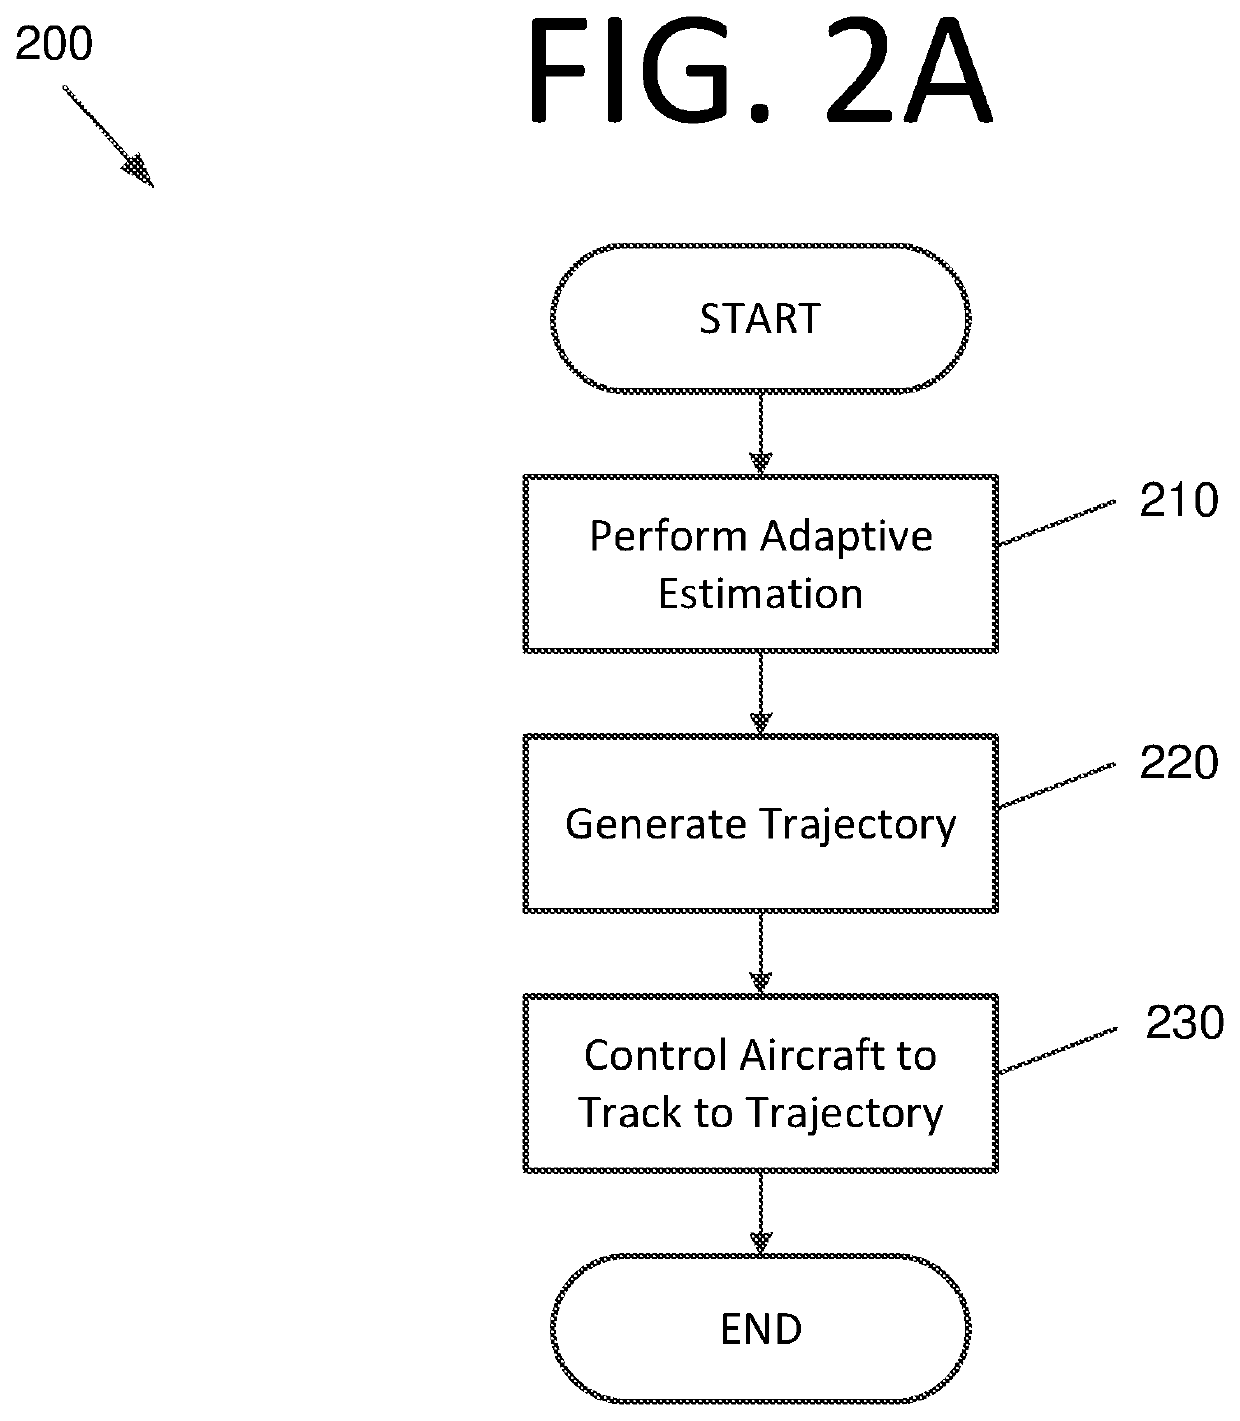 Adaptive wind estimation, trajectory generation, and flight control for aerial systems using motion data